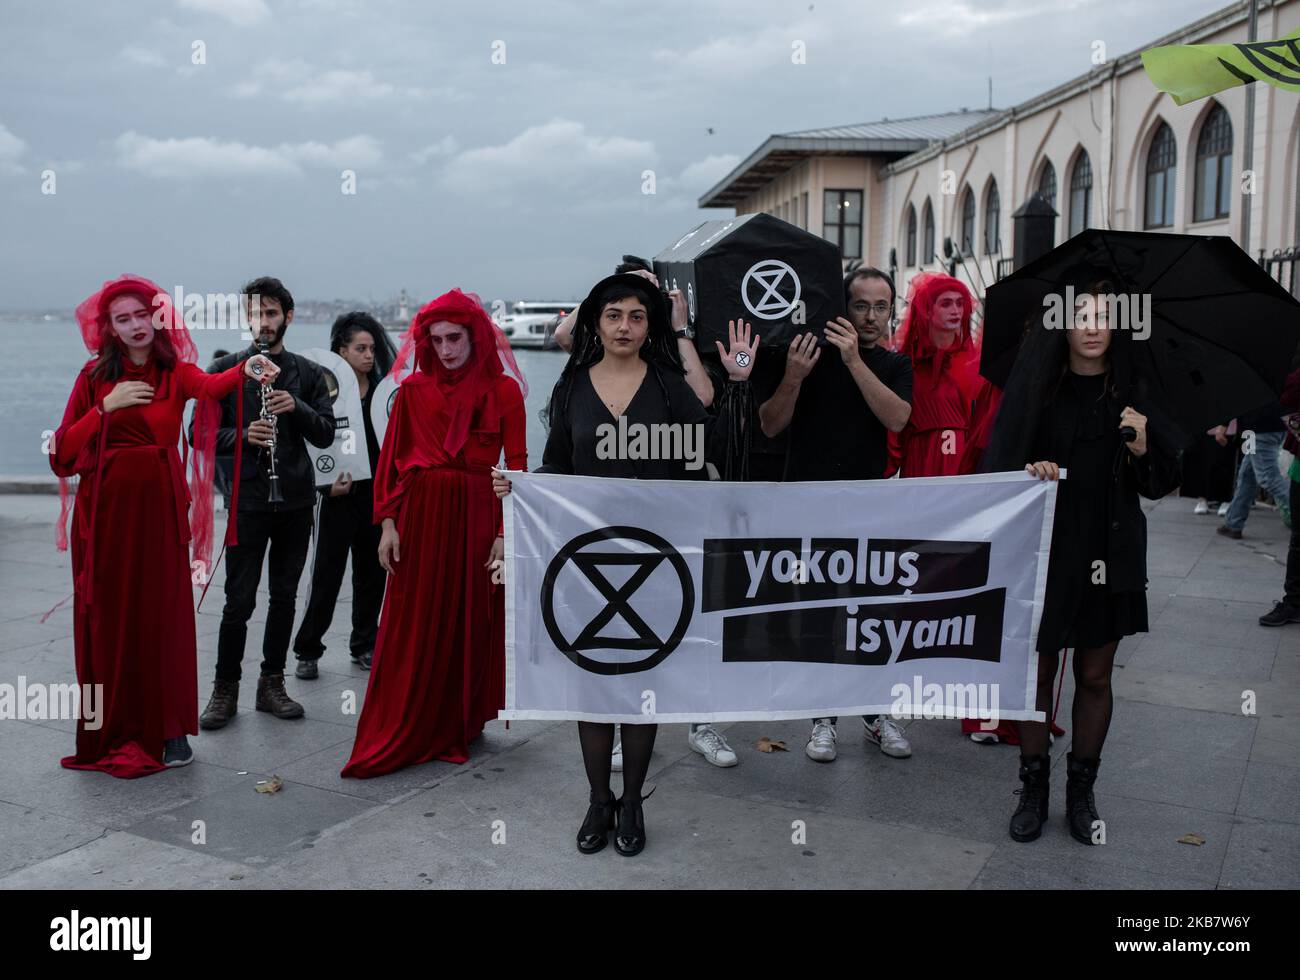 Extinction Rebellion Turkey organized a demonstration on October 7, 2019 in Istanbul for the representation of species that are on the verge of extinction. The protest included a reference to the Red Brigade, and the demonstrators carried a black coffin, symbolizing the extinct species. Extinction Rebellion is a socio-political movement around the world with the stated aim of using civil disobedience and nonviolent resistance to compel government action on climate breakdown, biodiversity loss, and the risk of social and ecological collapse. (Photo by Erhan Demirtas/NurPhoto) Stock Photo